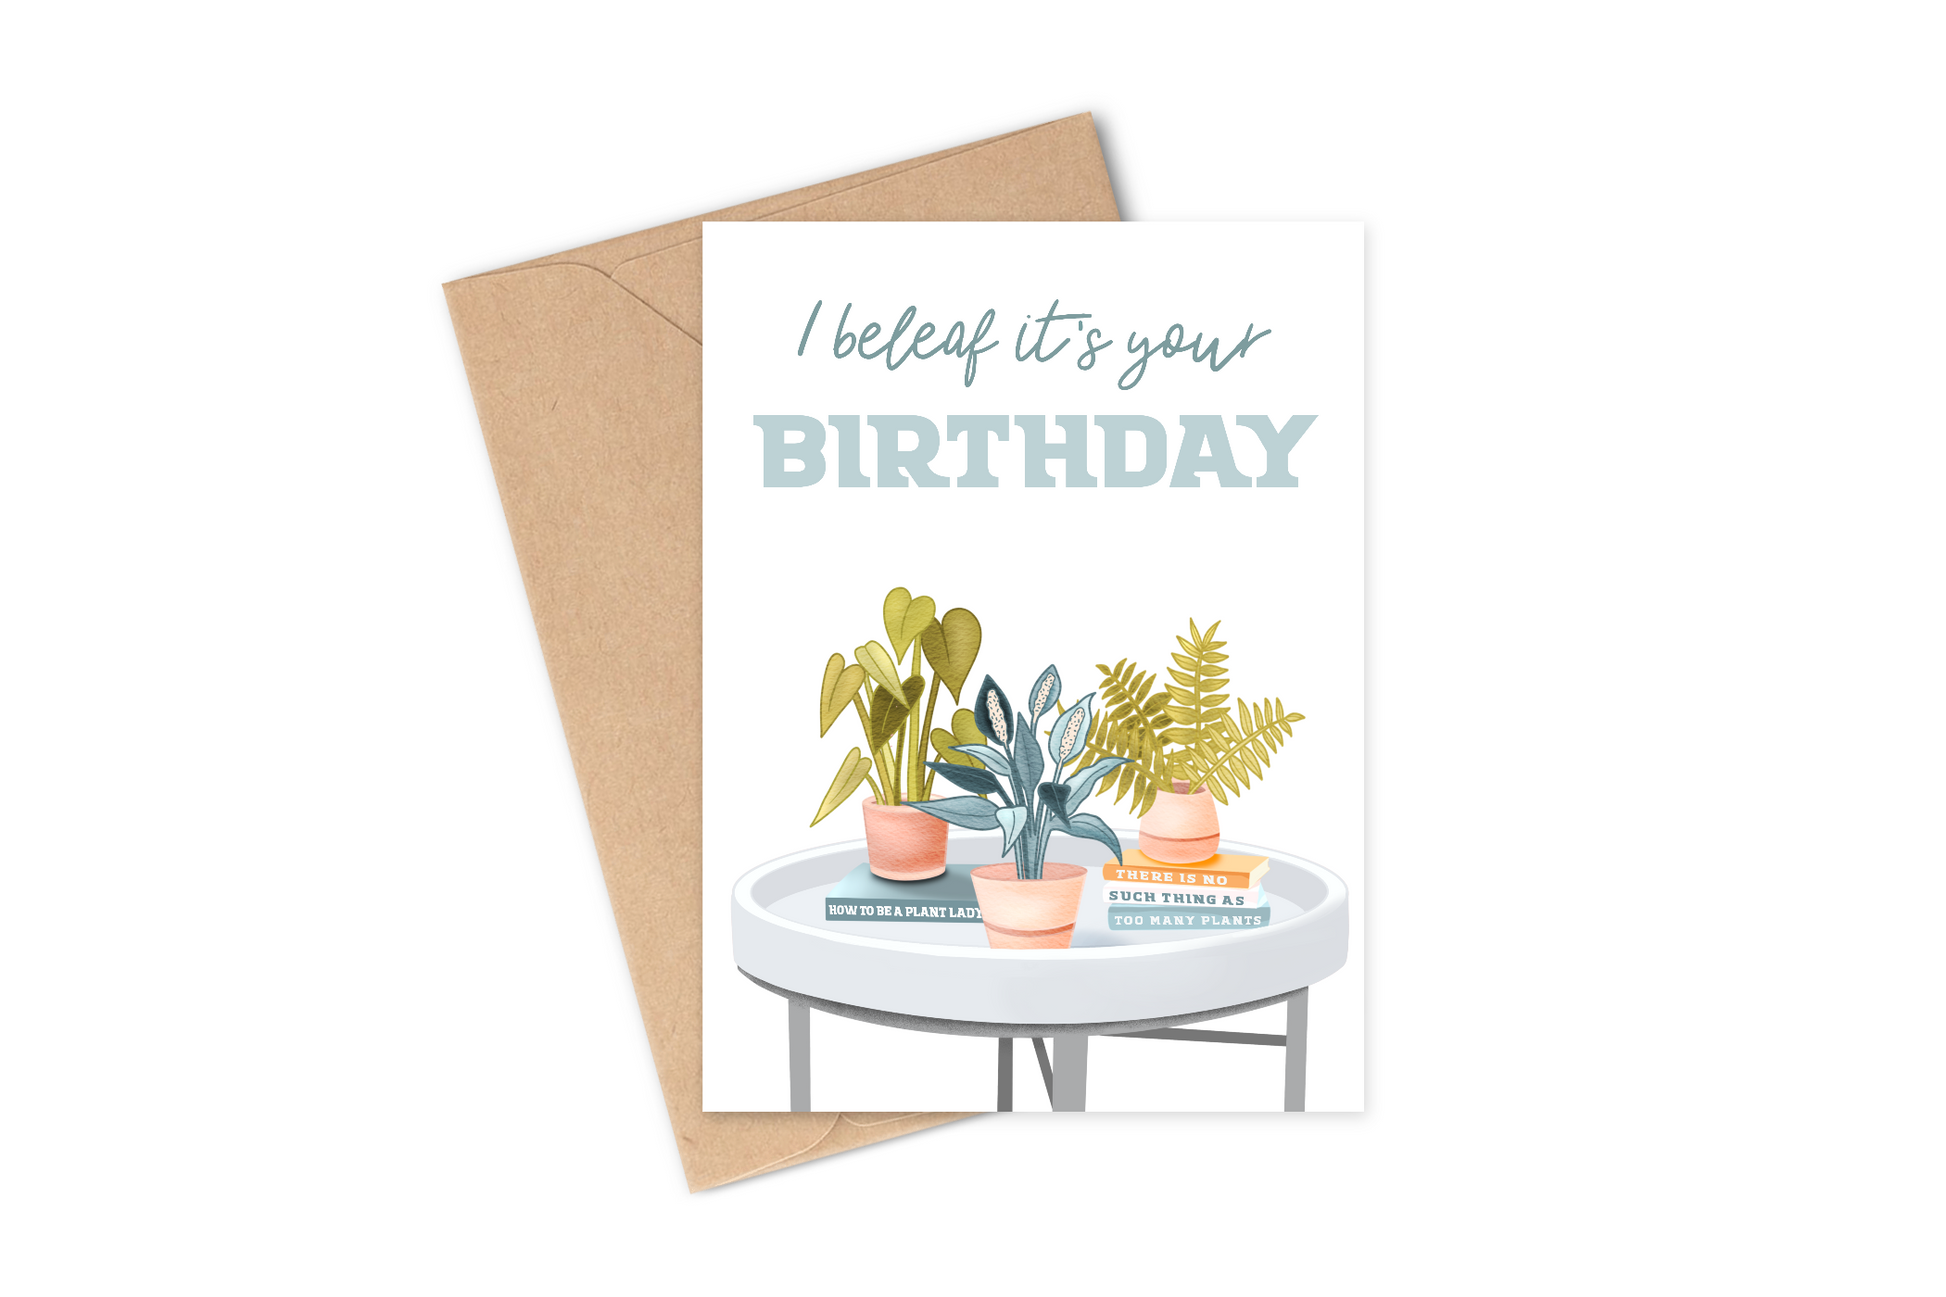 This greeting card makes an excellent pairing with any gift for your plant-loving friend.     Details: Hand-illustrated drawing of 3 potted plants sitting atop a coffee table with books. The main text says "I beleaf it's your birthday" and there are some cute hidden messages on the books. The ones on the right say 'there is no such thing as too many plants' and on the left it says 'how to be a plant lady'. Your friend, family member or coworker is sure to love this card!